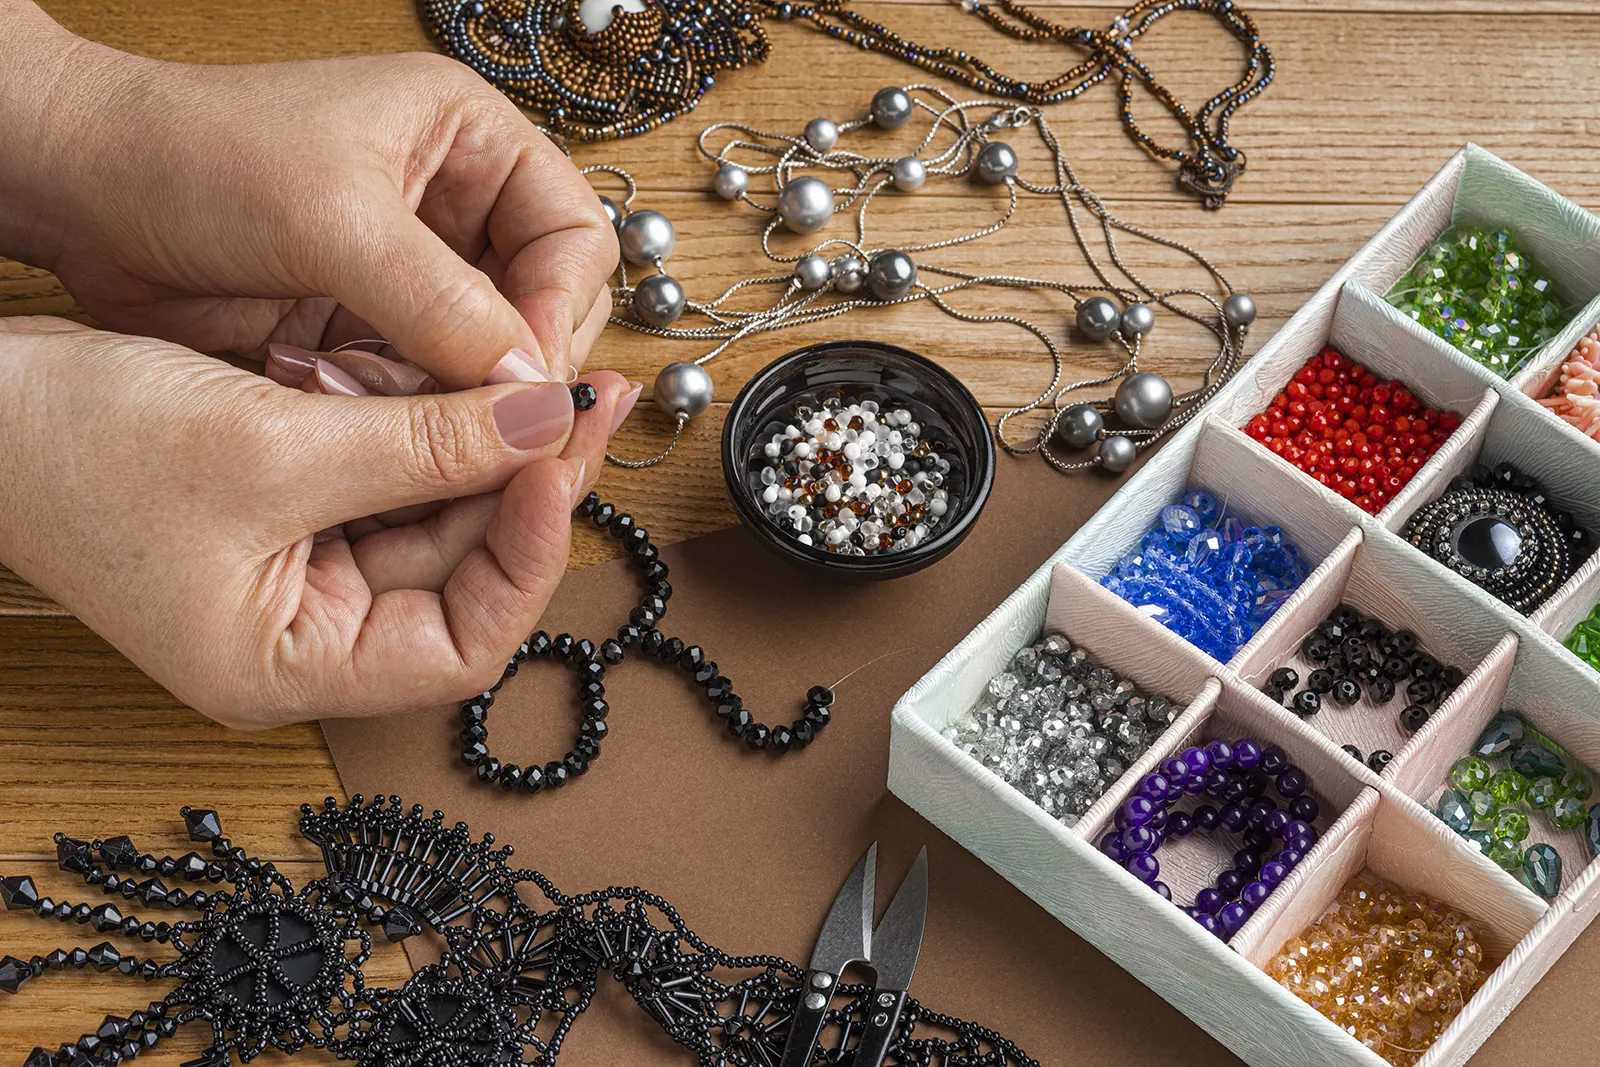 Is Handmade Jewelry More Expensive?